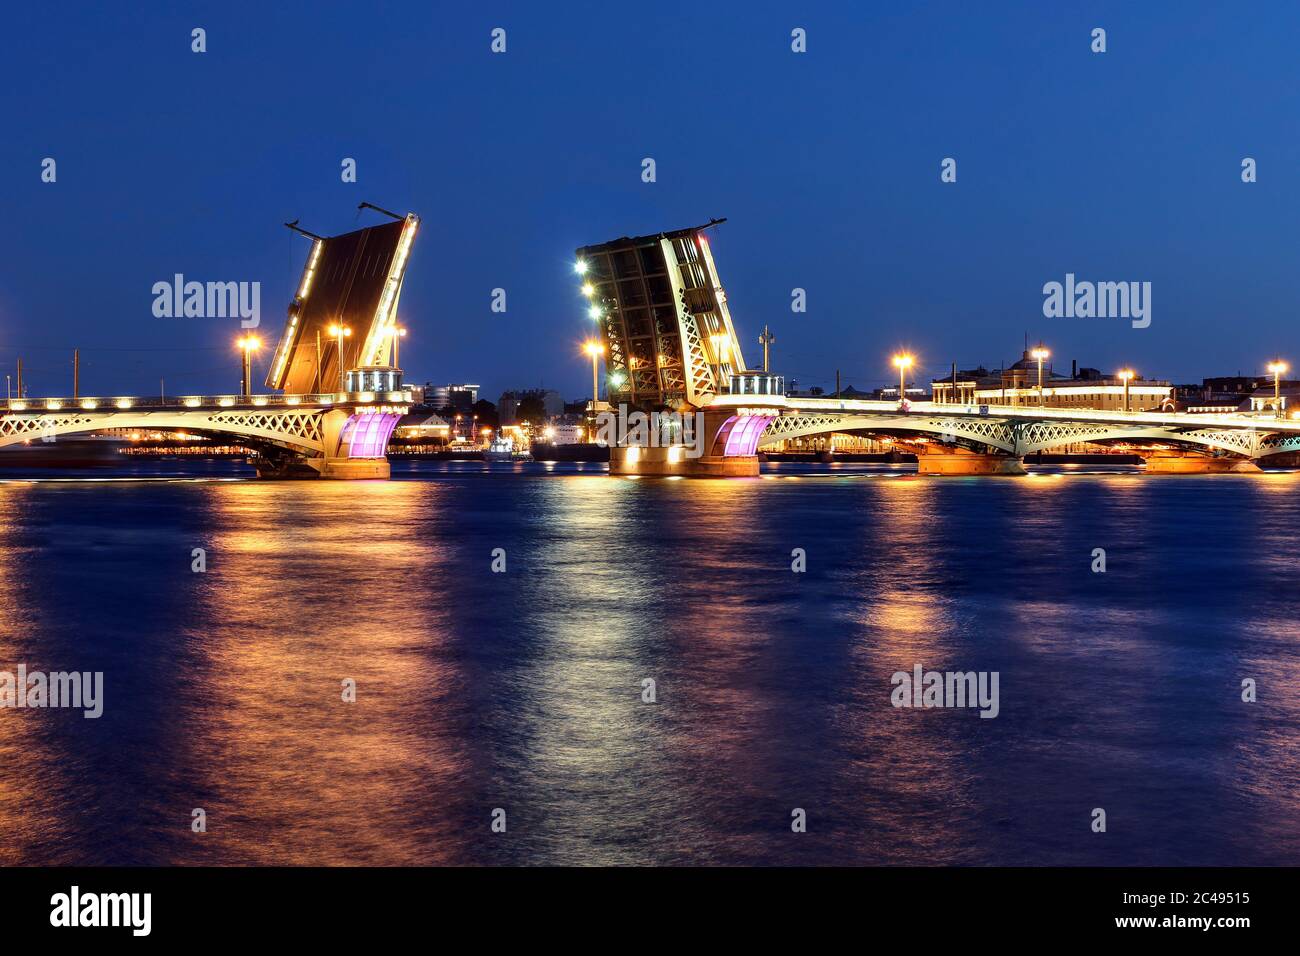 Blagoveschchenskiy Bridge over the Neva River in Saint Petersburg in it's open position to allow ships to enter the city during the white nights of Ju Stock Photo